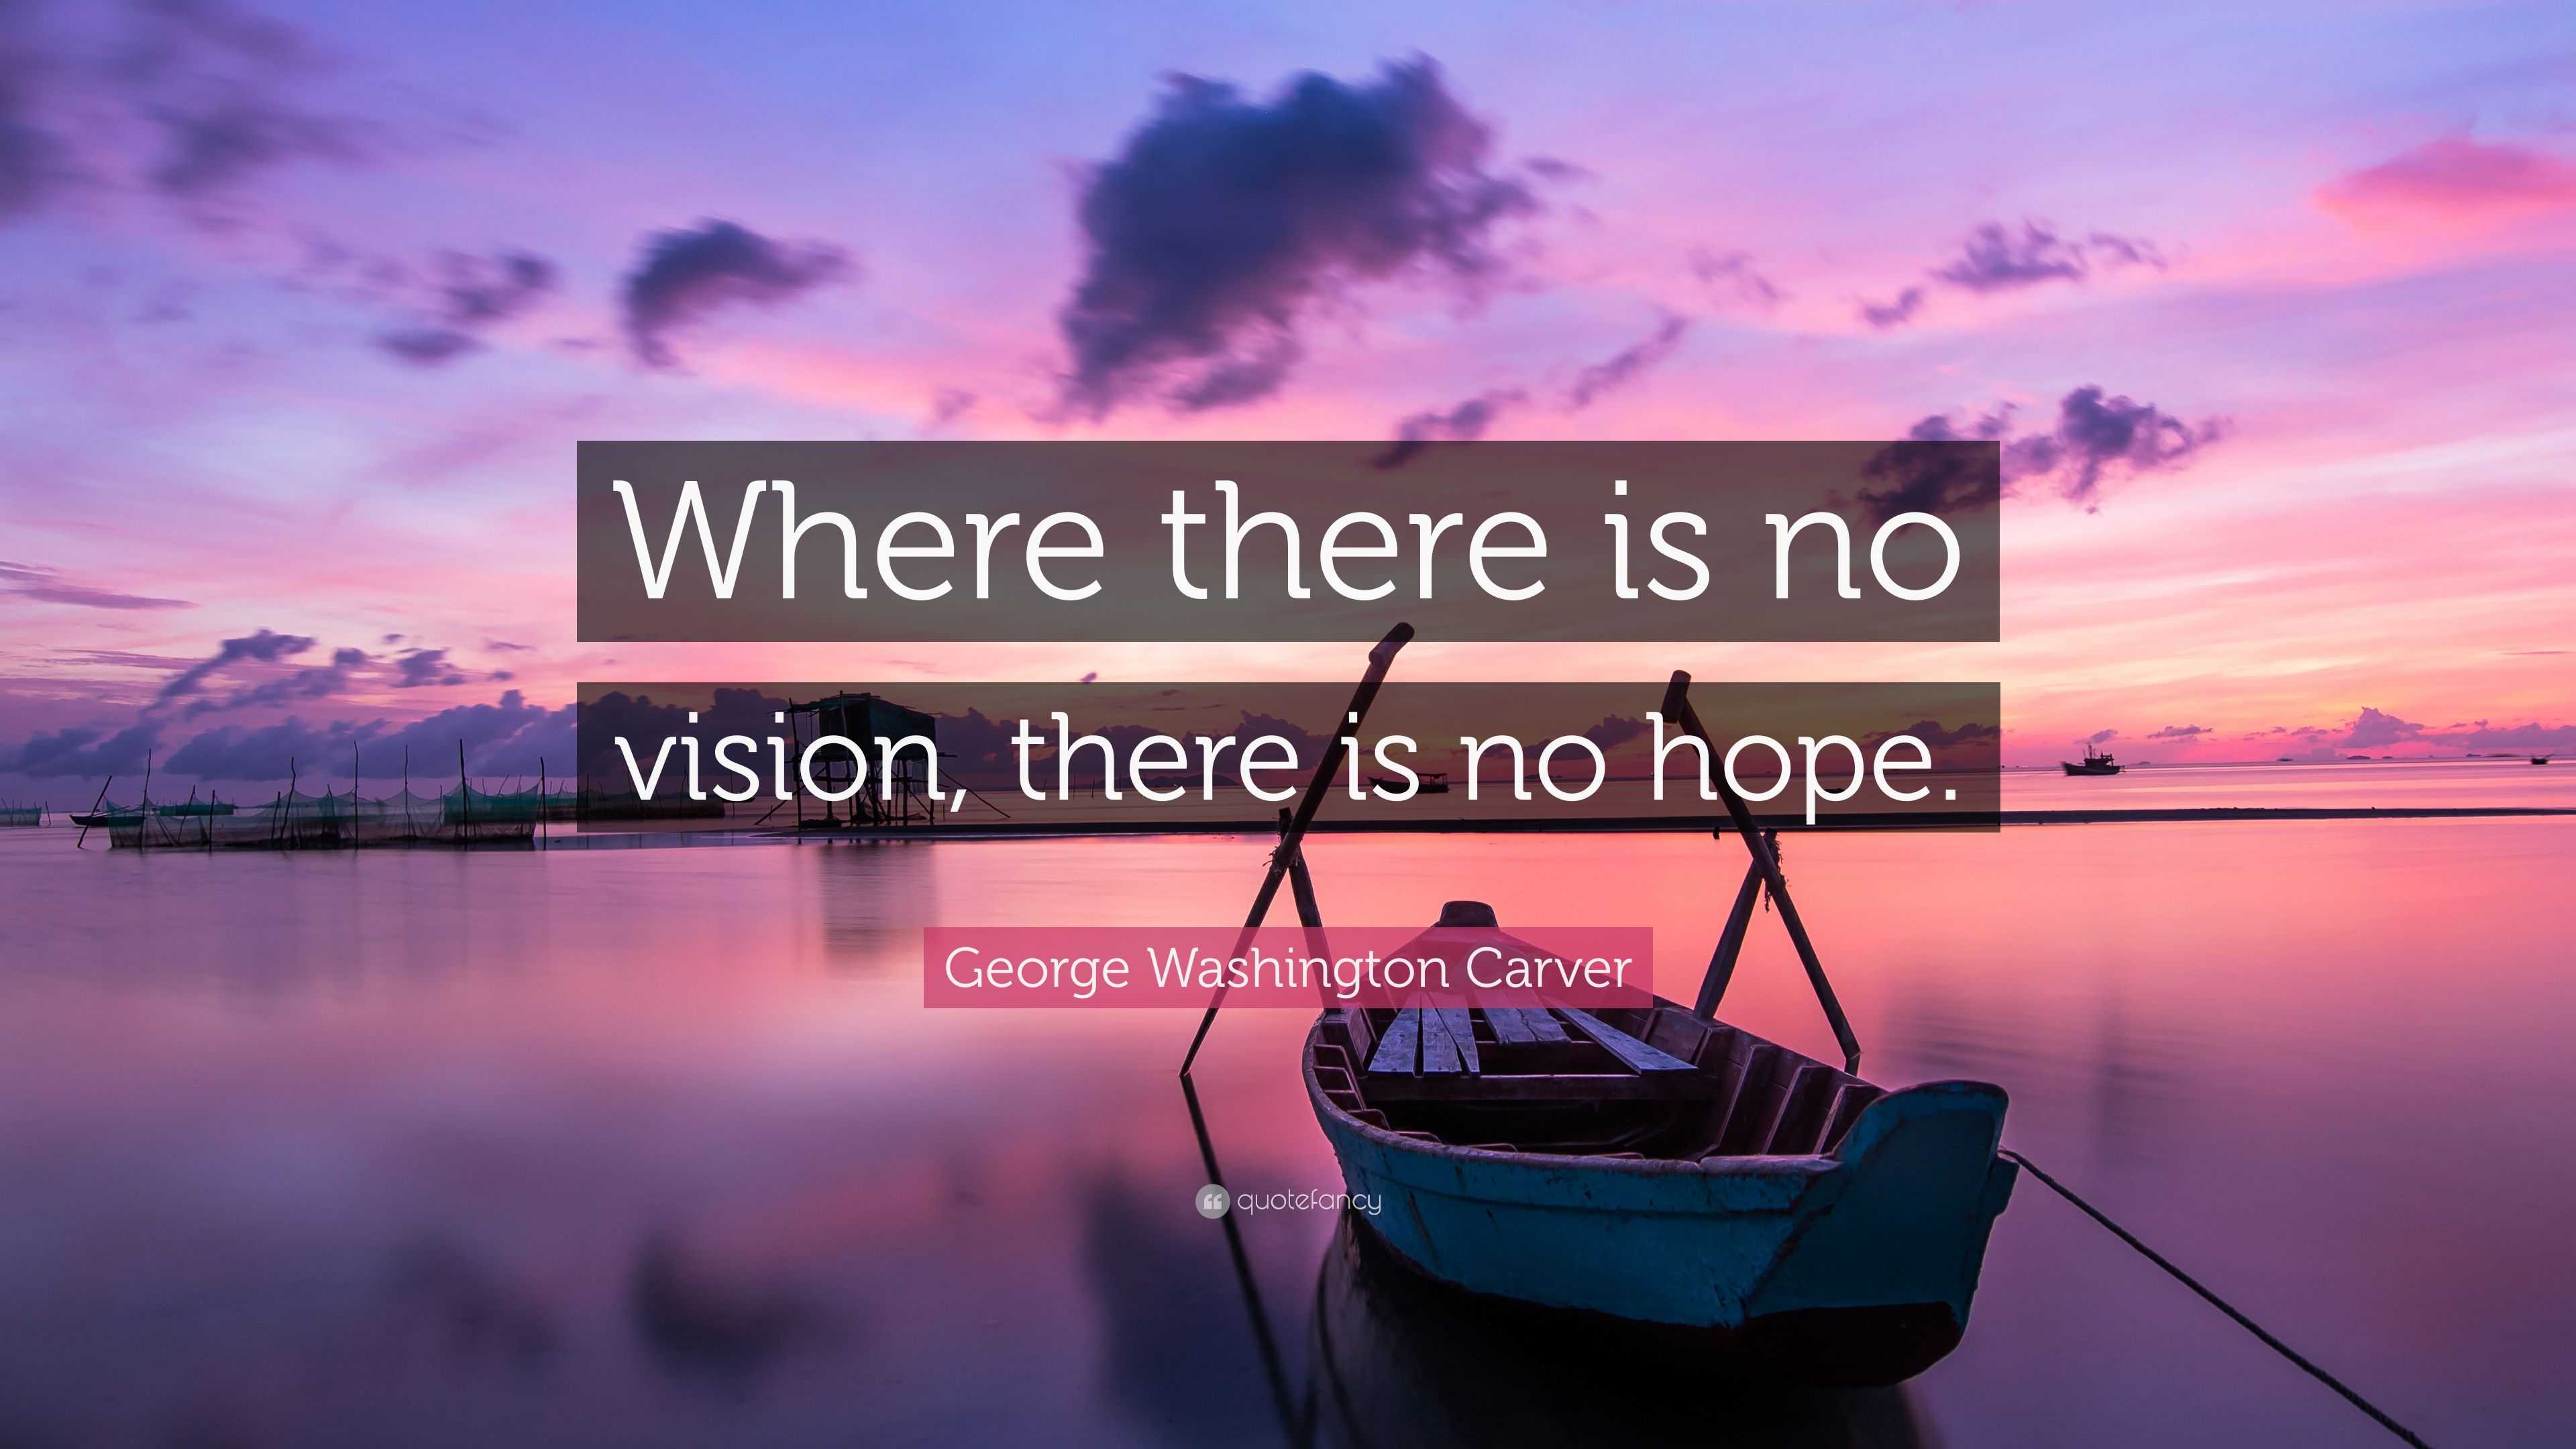 2020573 George Washington Carver Quote Where there is no vision there is